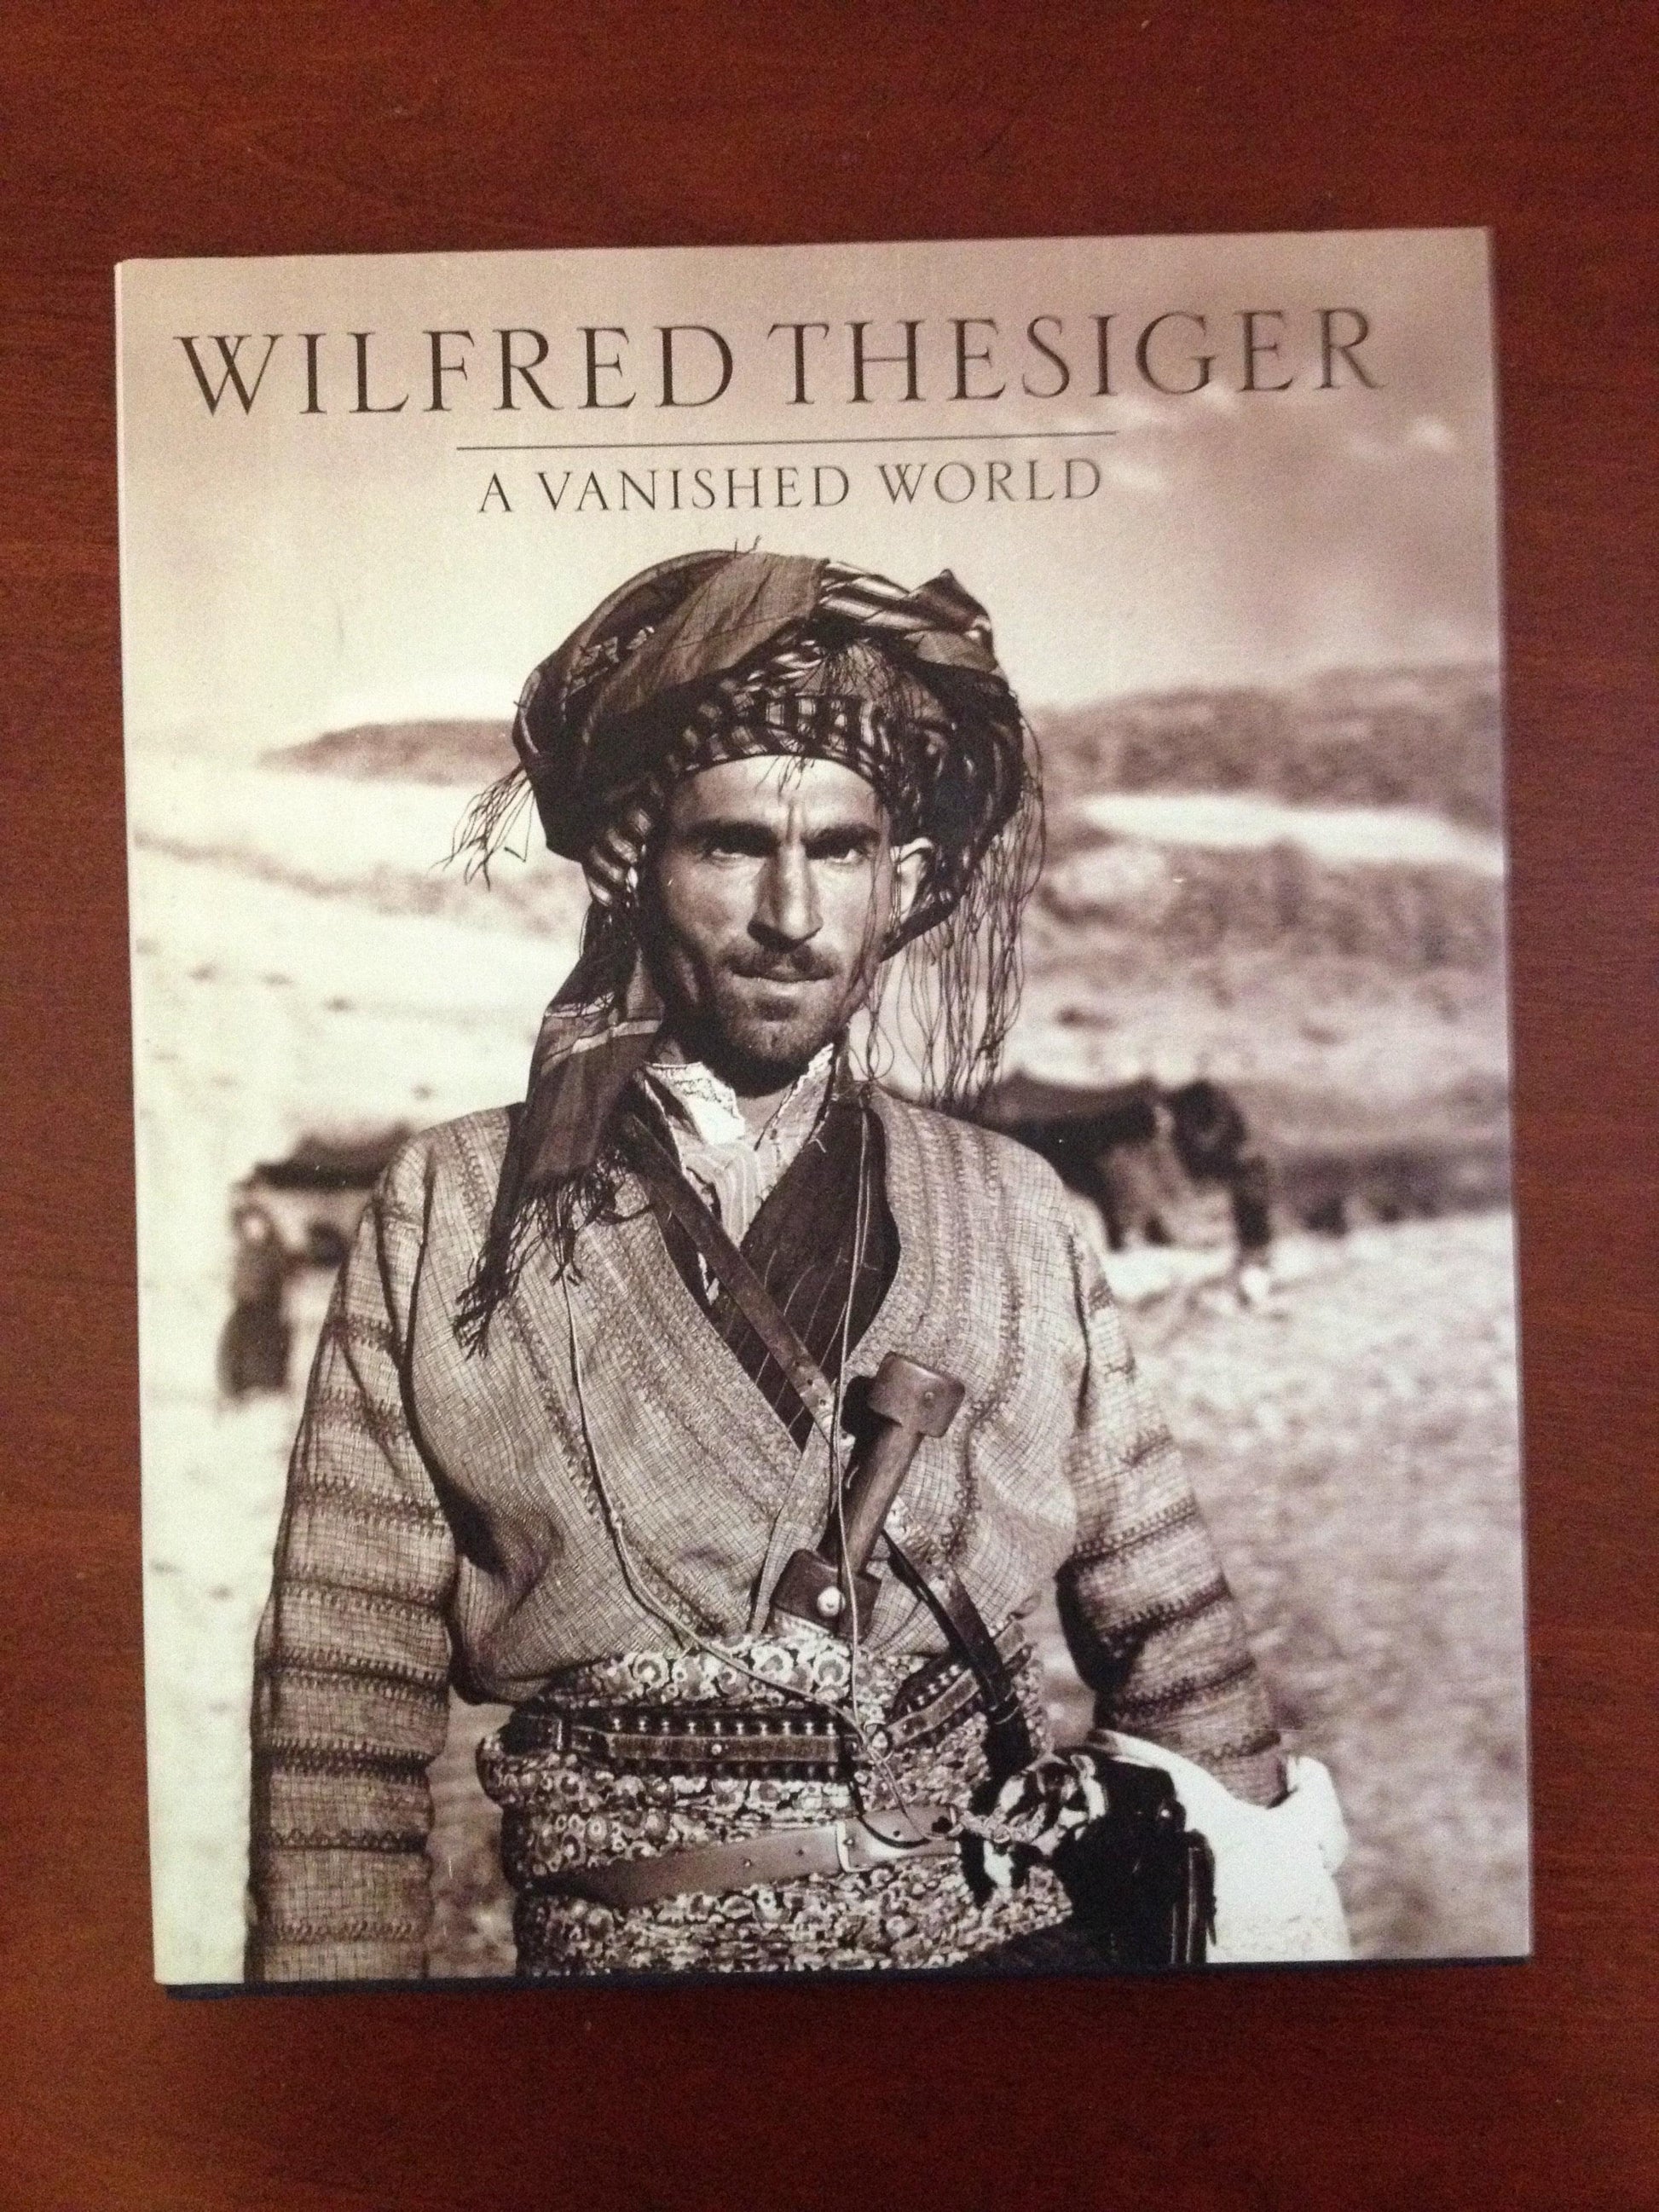 A VANISHED WORLD  BY: WILFRED THESIGER BooksCardsNBikes